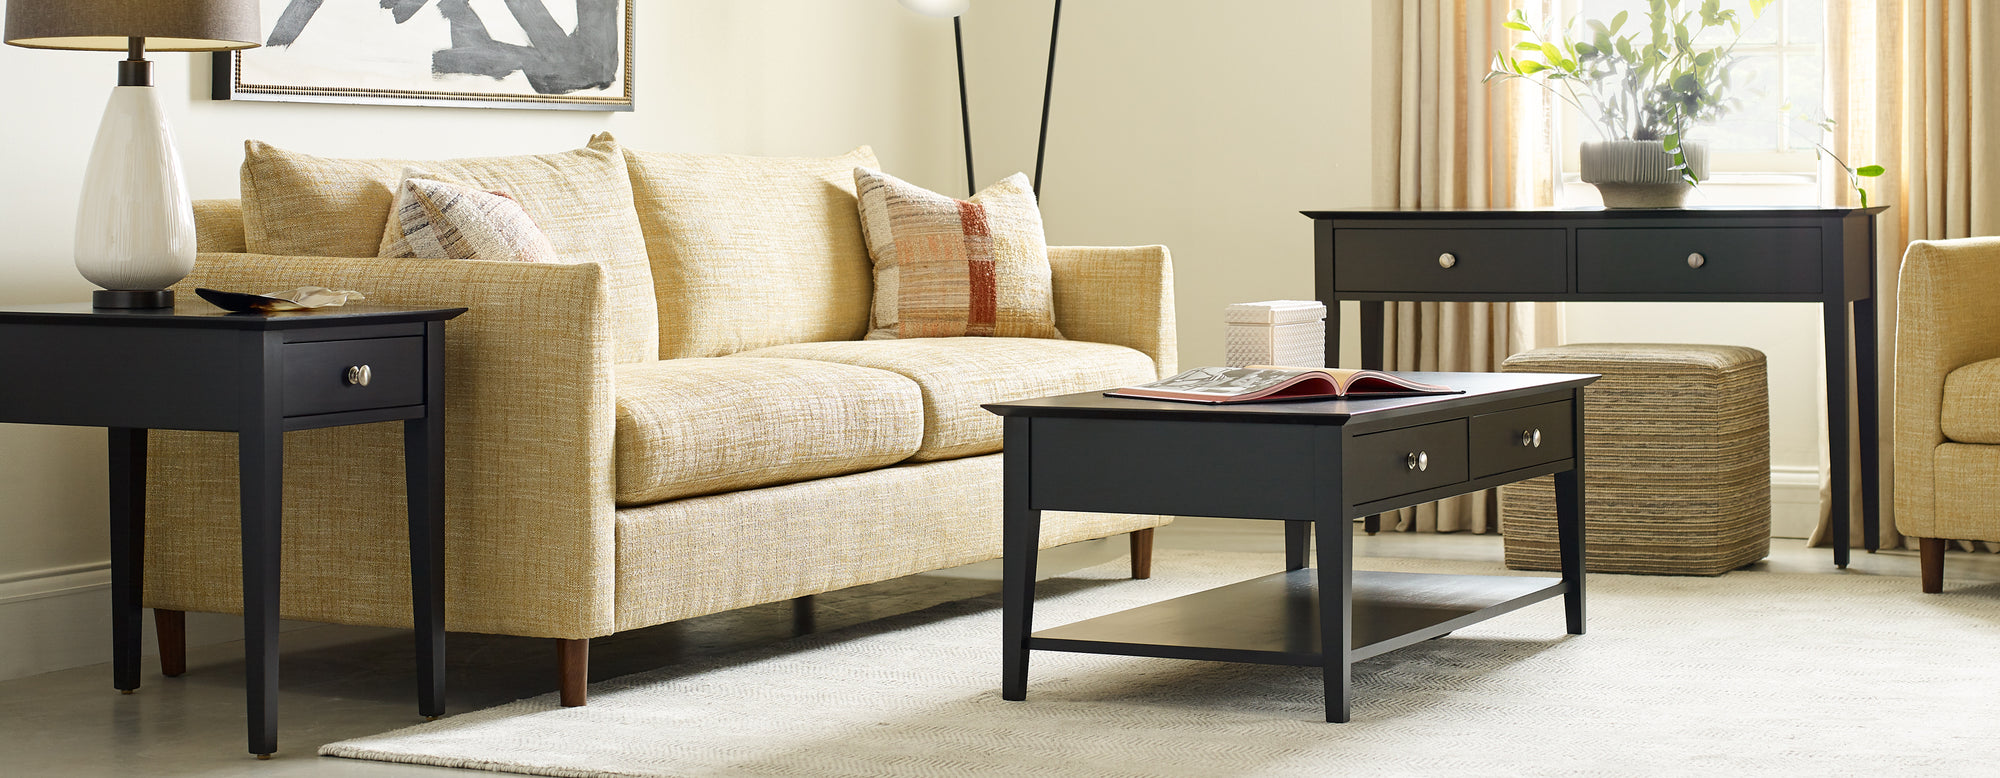 Lifestyle of a Gable Road Rectangular Coffee Table in the color 809-EBONY with a matching Console Table next to it in the background